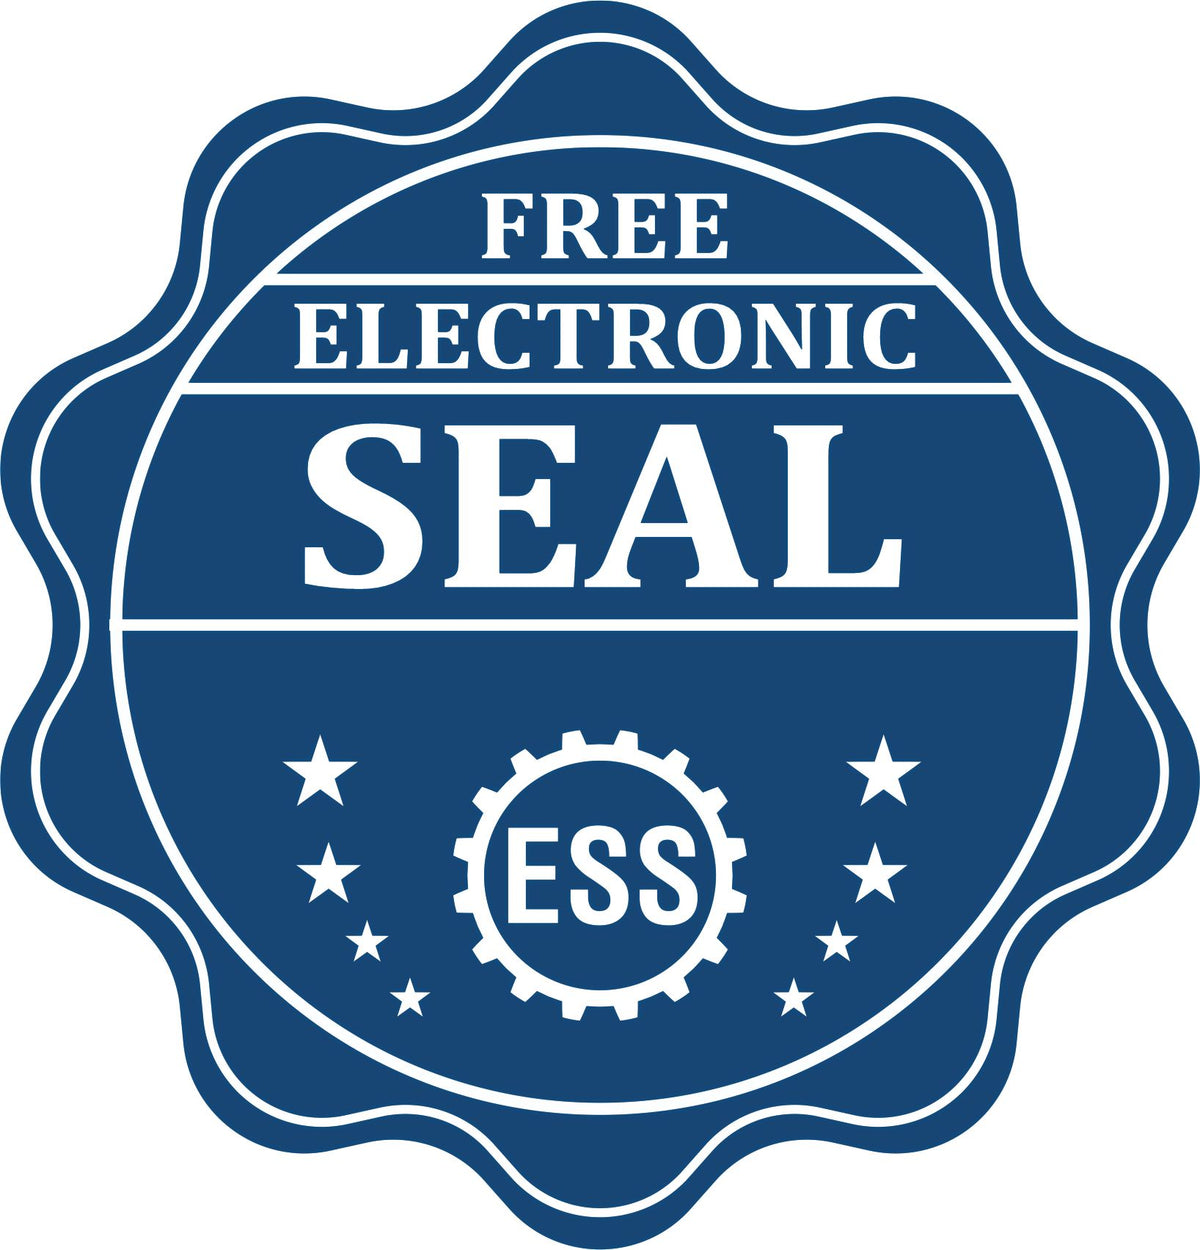 A badge showing a free electronic seal for the Hybrid Virginia Architect Seal with stars and the ESS gear on the emblem.